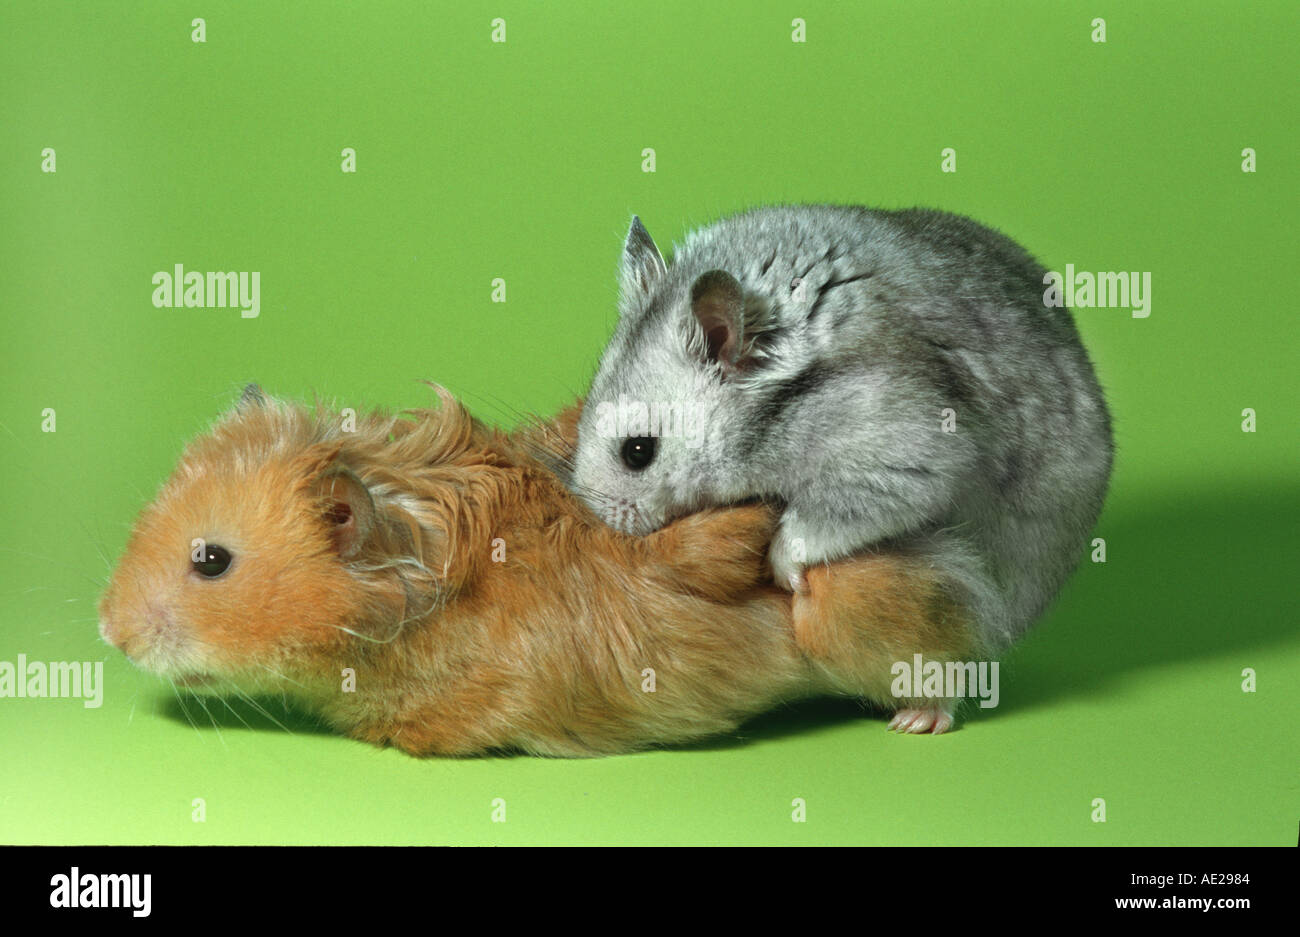 MESOCRICETUS MATING Couple SERIES pic 1 of hamster in love Stock Photo - Alamy